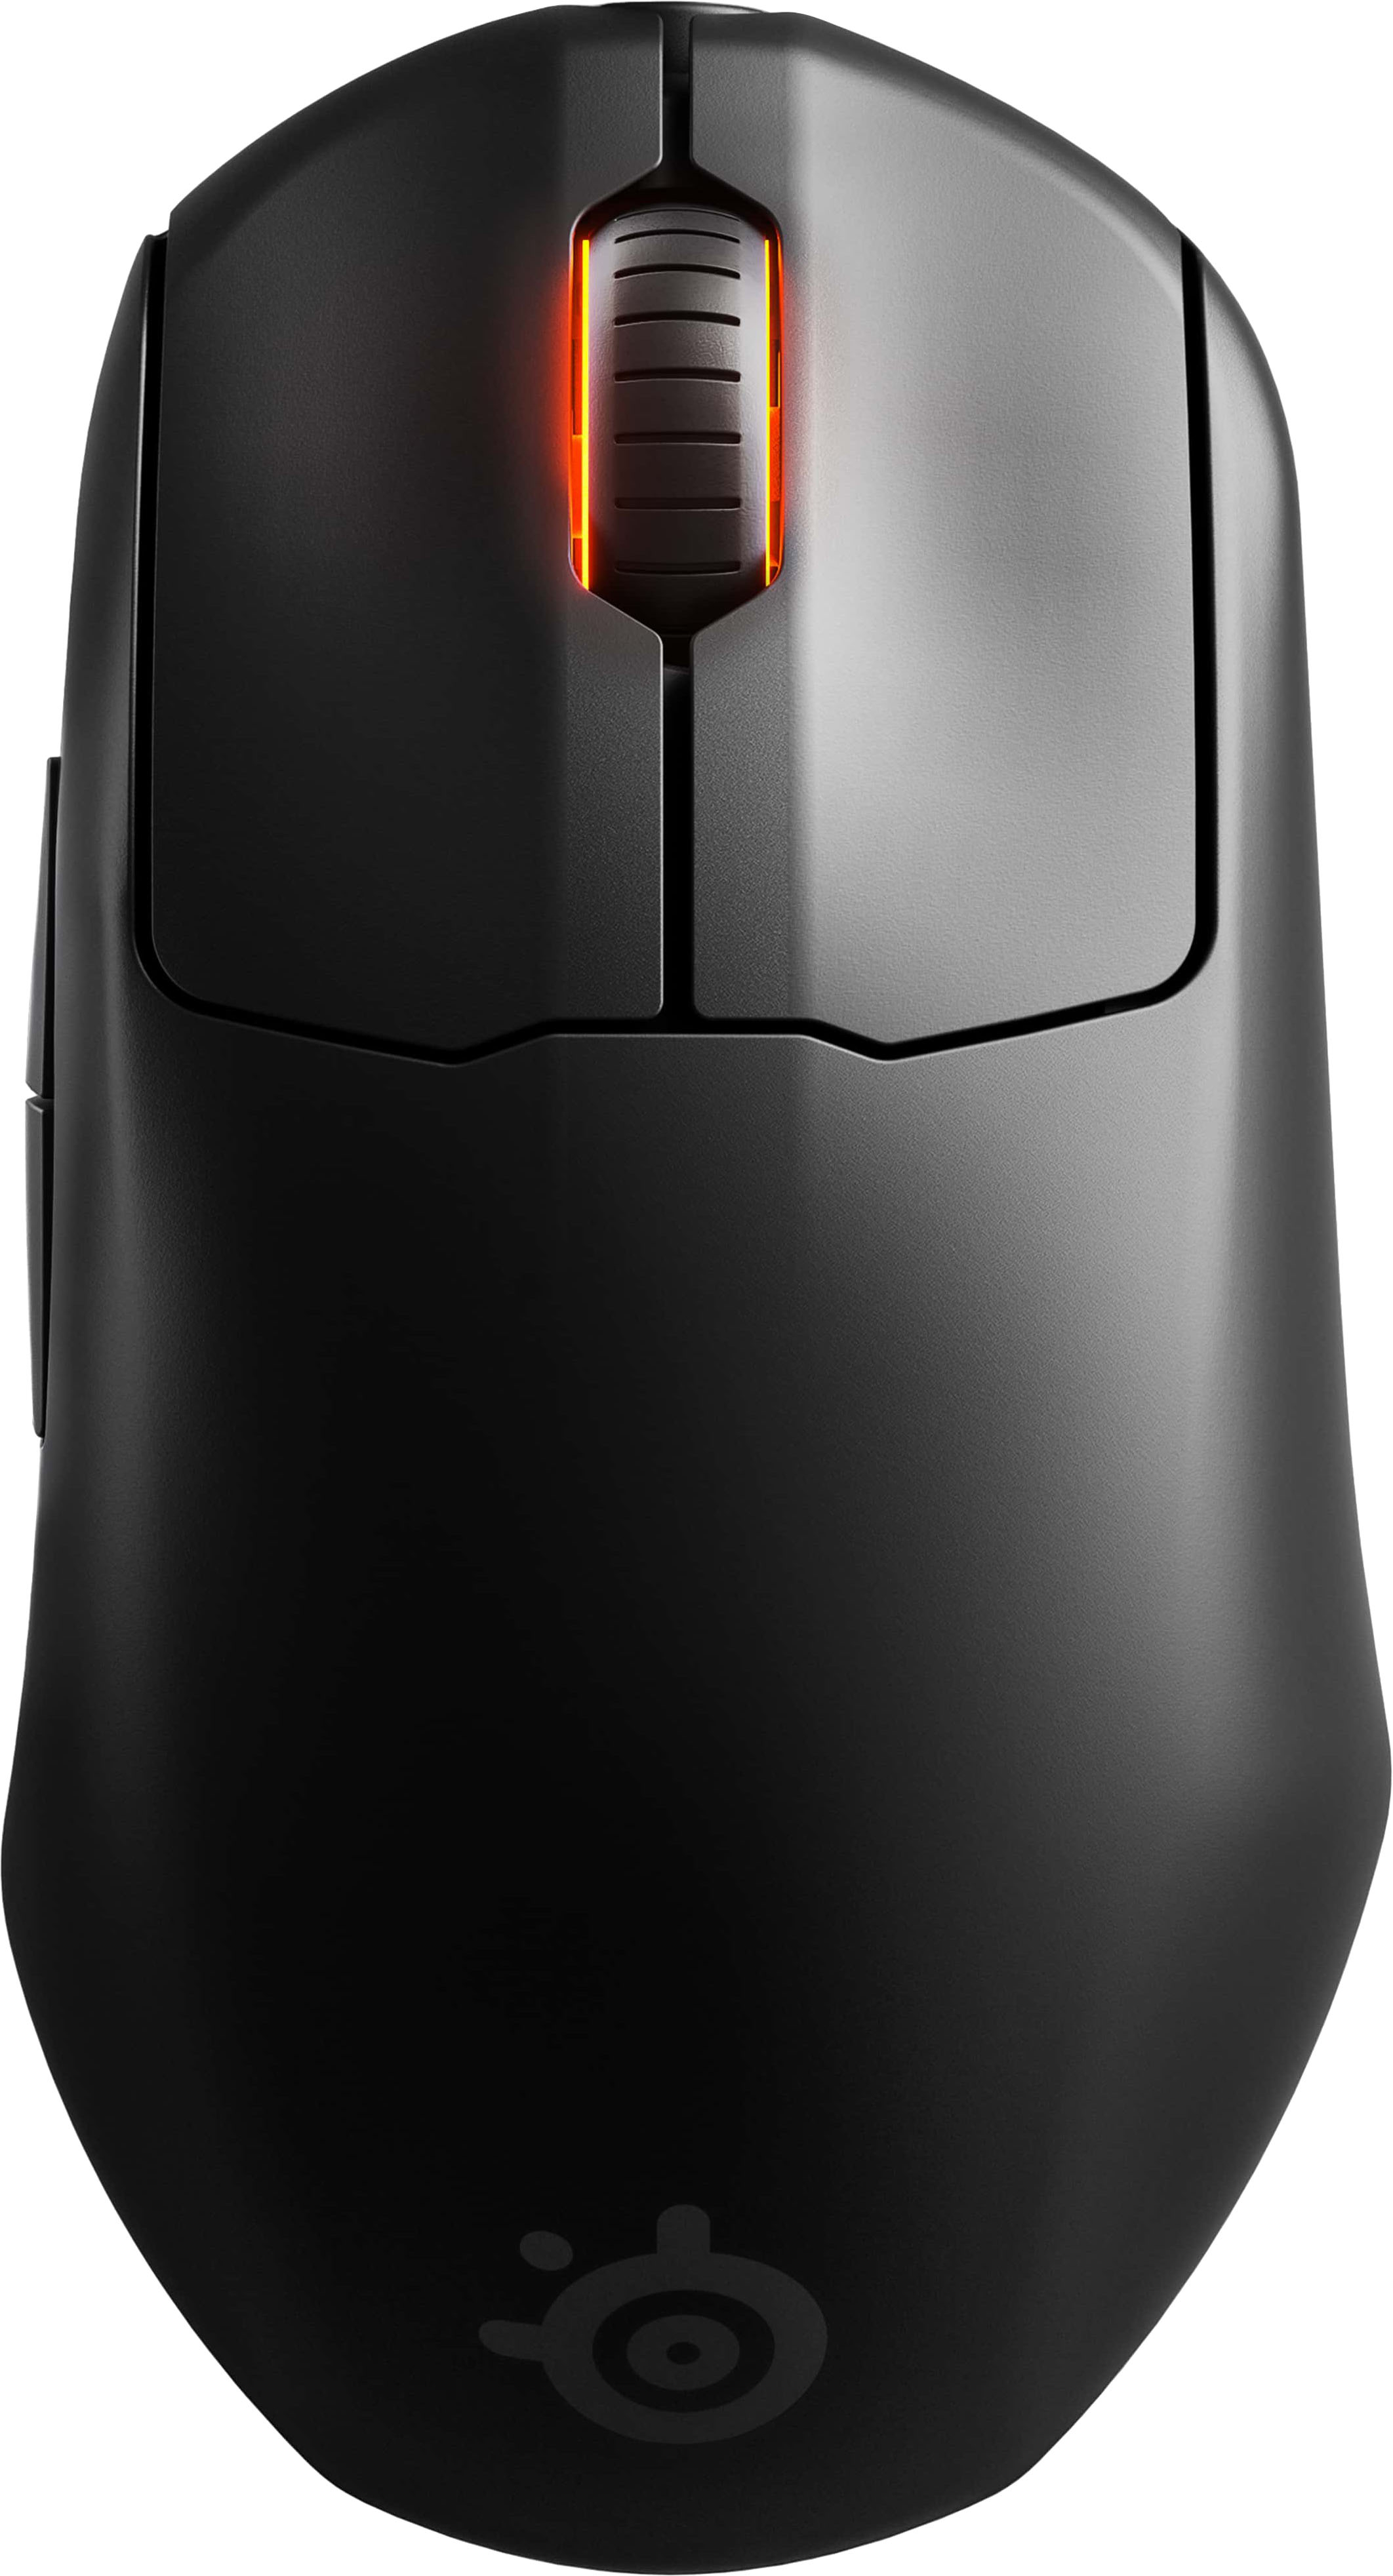 SteelSeries Sensei Wireless Gaming Mouse Pre-Order - Costs 160 EURO